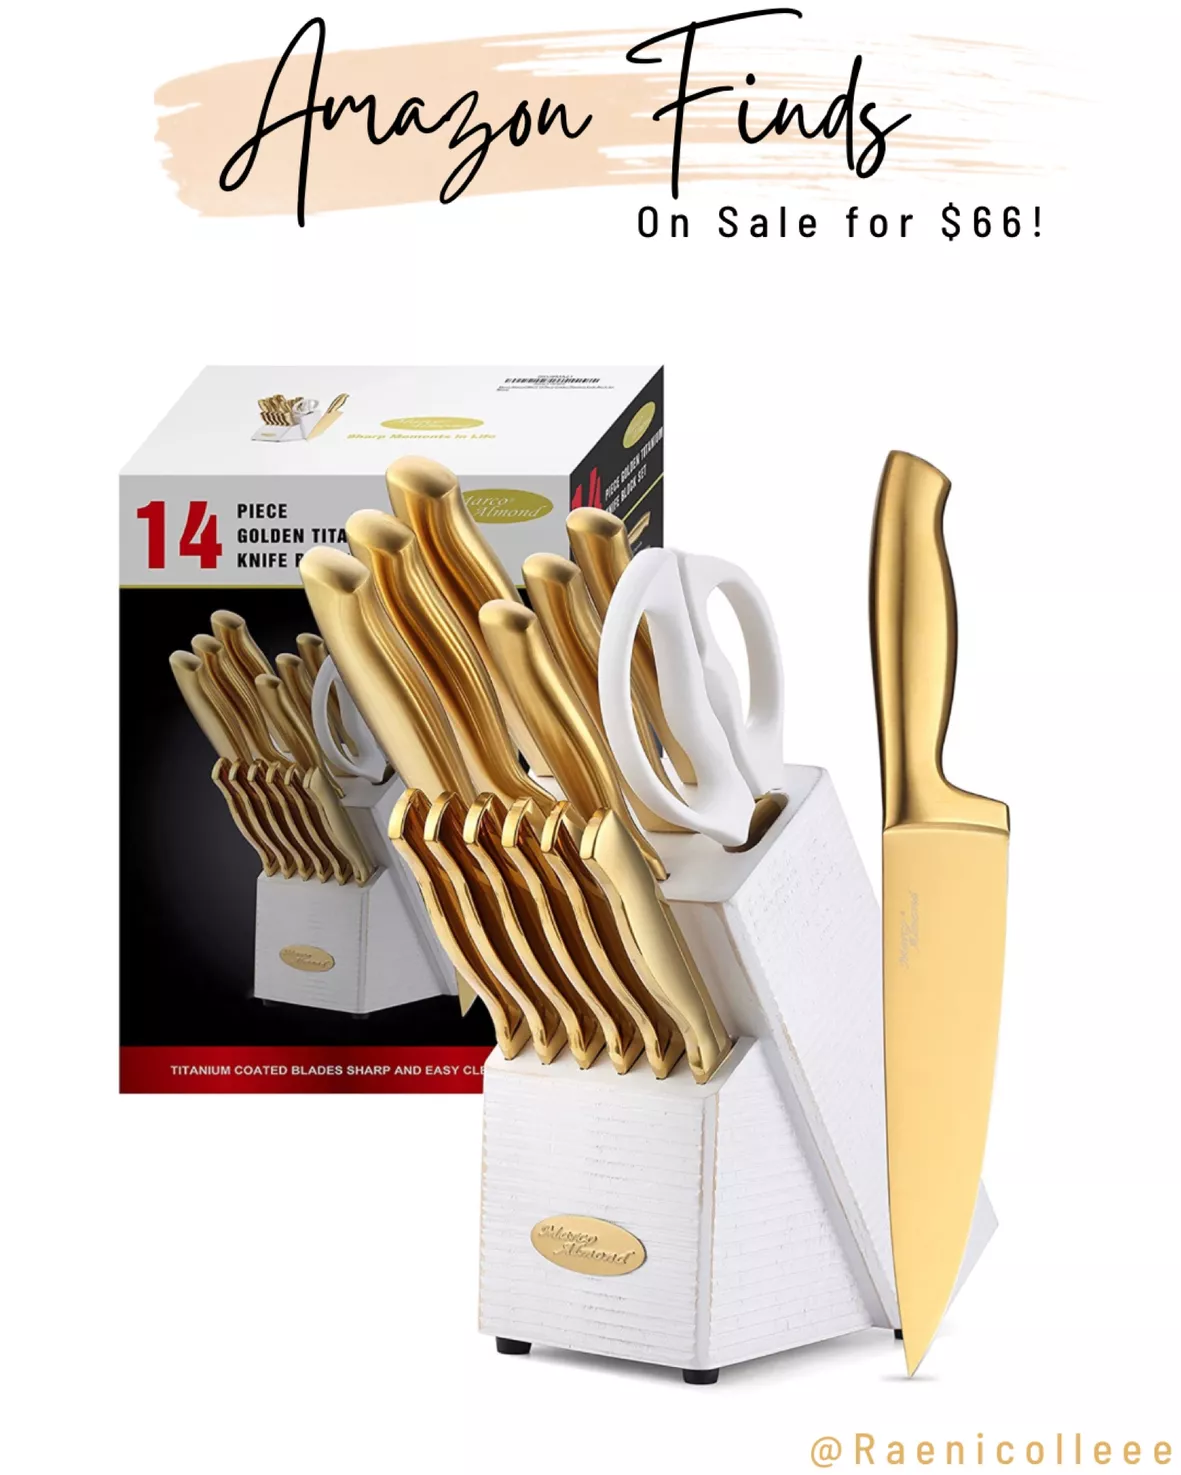 Beautiful 6 Piece Stainless Steel Knife Set in Black Champagne Gold By Drew  Barrymore 